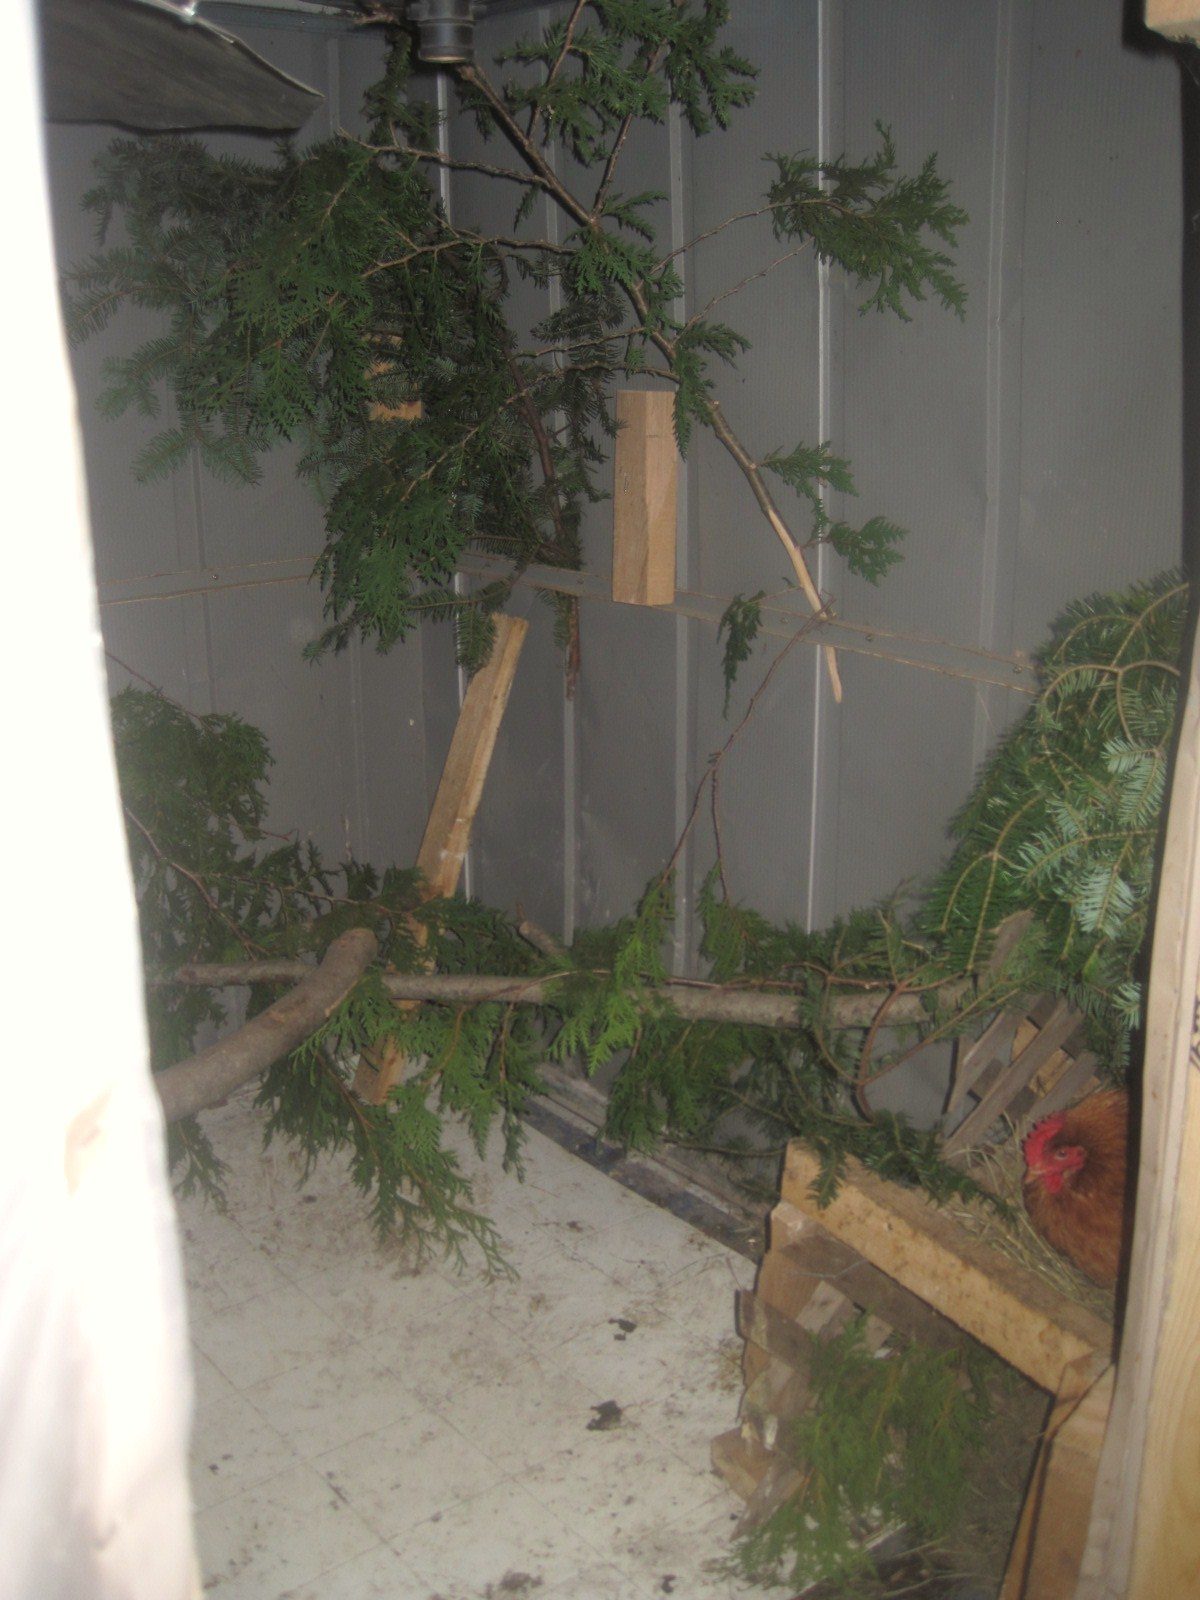 inside the coop. they all love the real branches to perch on. they also have 4 boxes to lay in